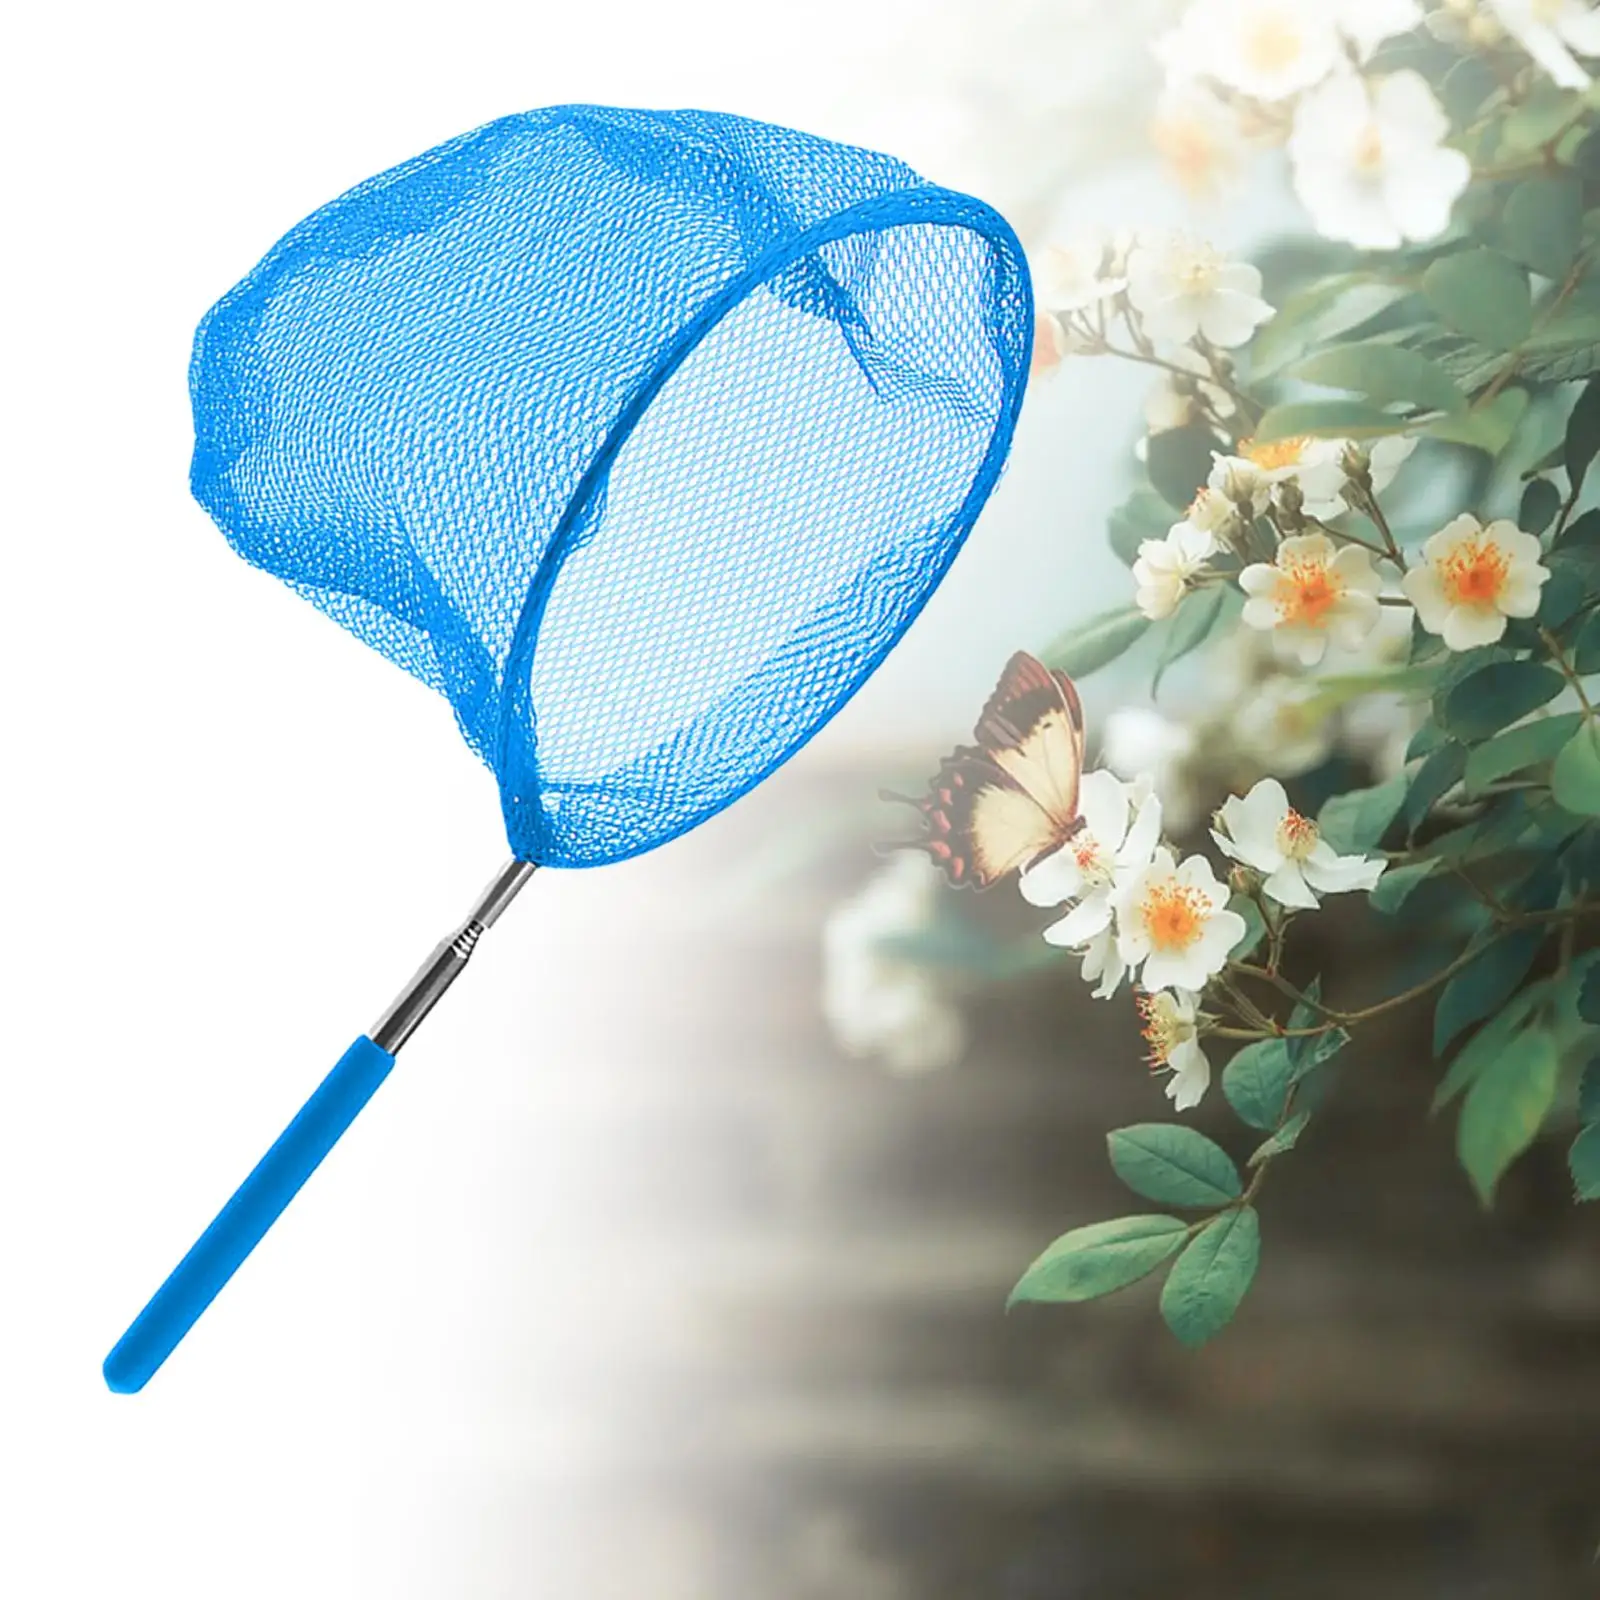 Kids Fishing Net Foldable Toy Simple to Use Telescopic for Garden